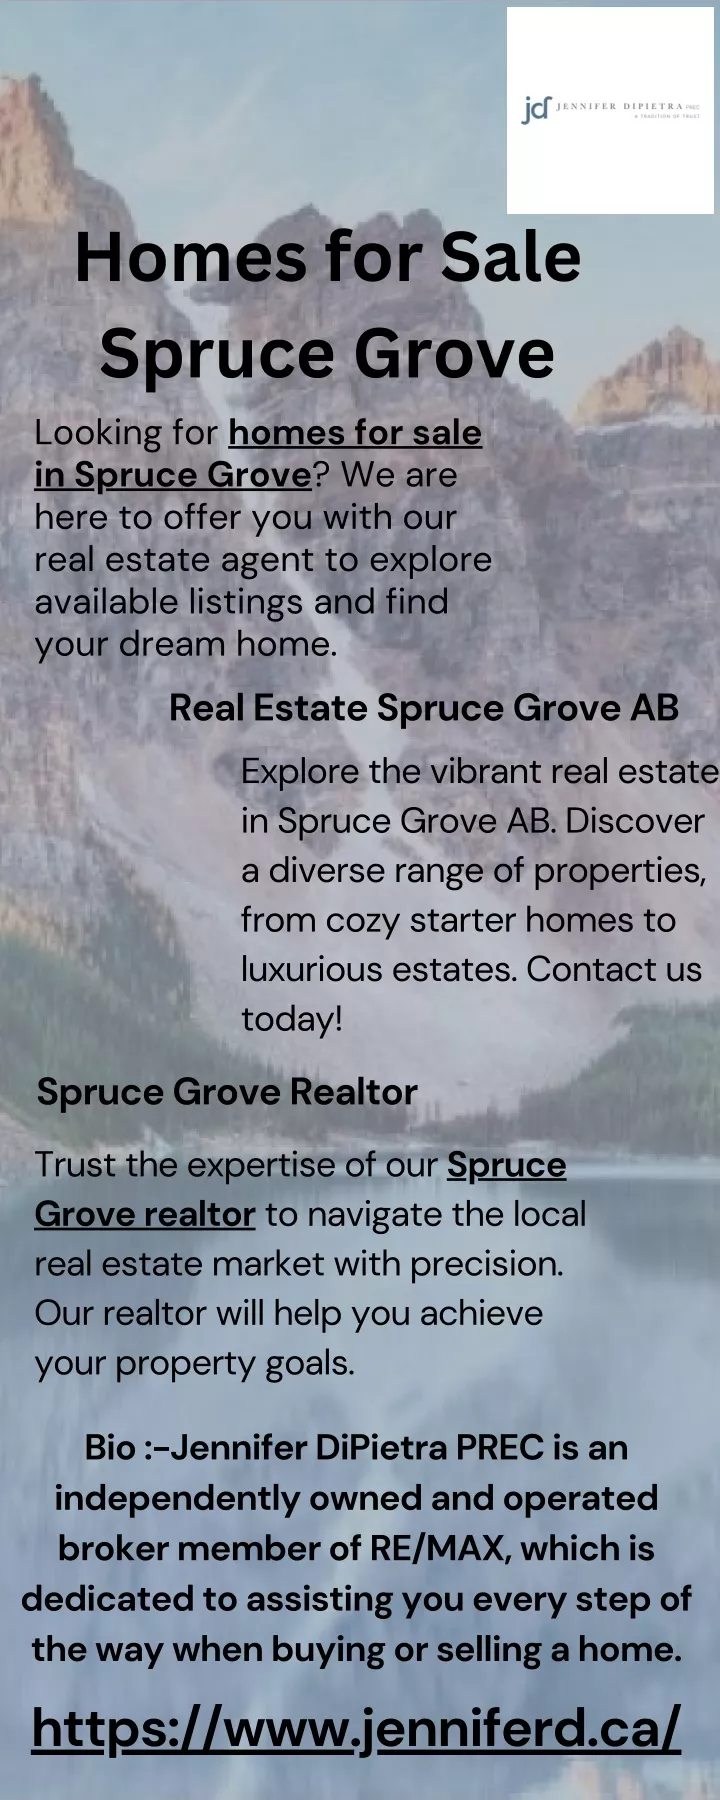 homes for sale spruce grove